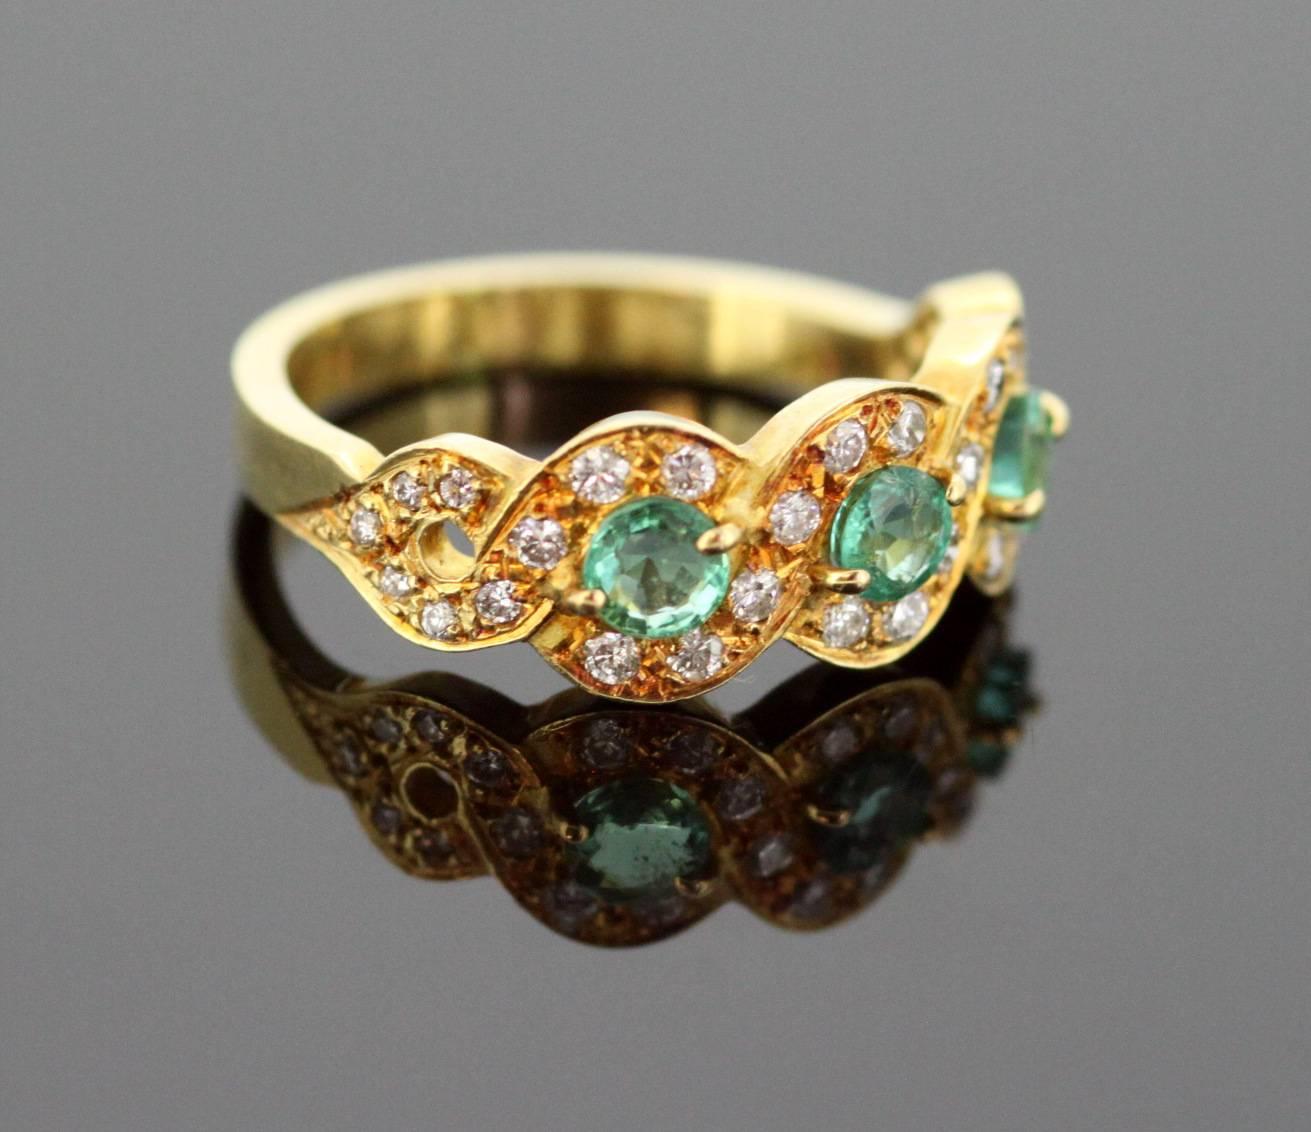 Vintage 18K Yellow Gold Ladies Ring With Emerald (0.75 CT Total) and Diamonds (0.30 CT Total) 
London 1989
Maker : HAP
Fully hallmarked.

Dimensions -
Finger Size: (UK) = O (US) = 7 1/2 (EU) = 55 1/4
Ring Size : 2.3 x 2.3 x 0.8 cm
Weight: 5 g